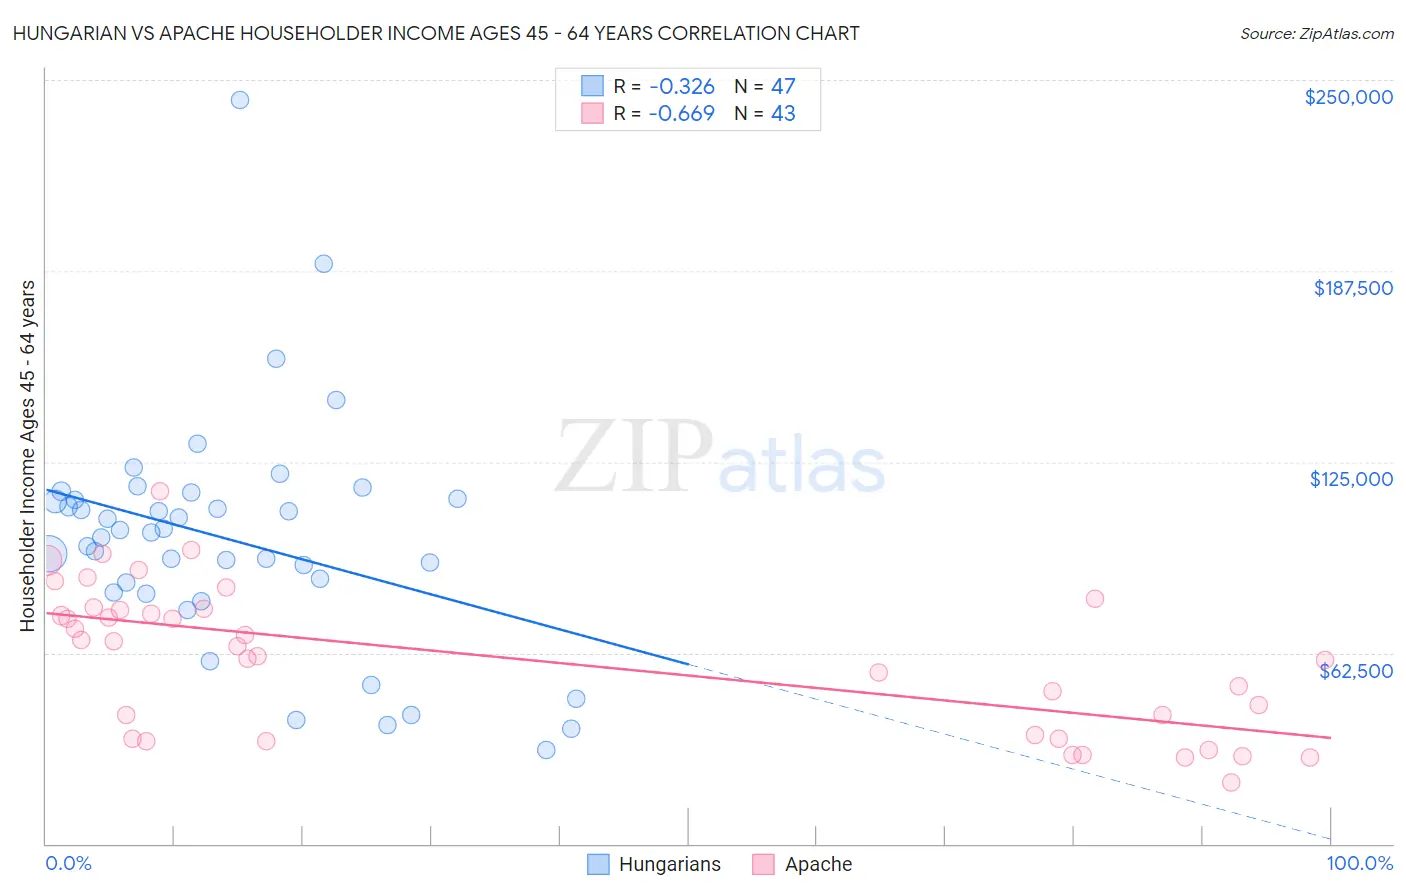 Hungarian vs Apache Householder Income Ages 45 - 64 years